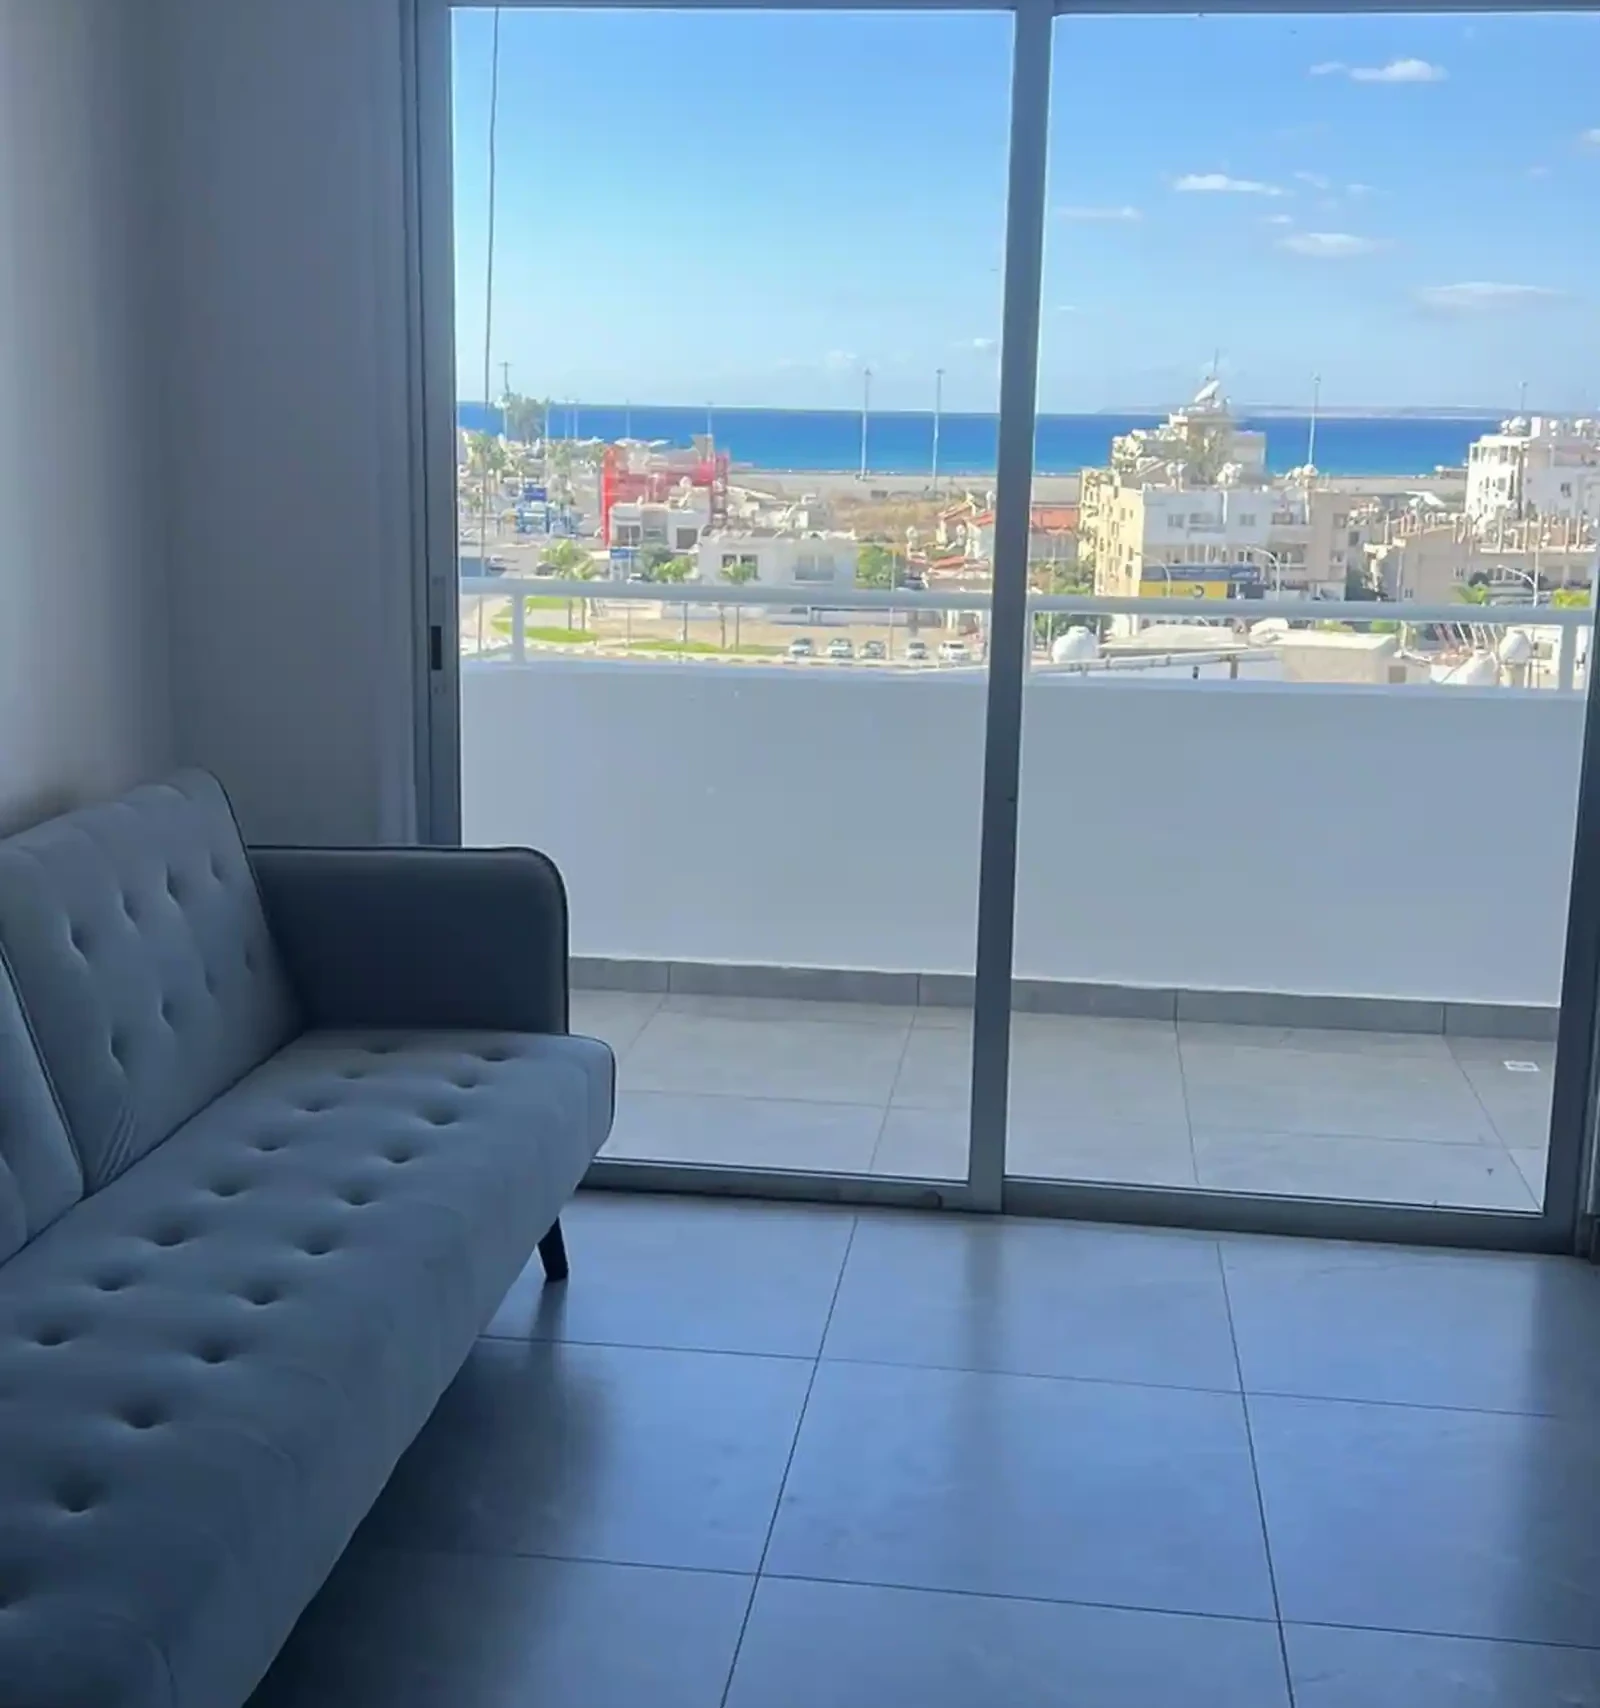 2-bedroom apartment fоr sаle €185.000, image 1